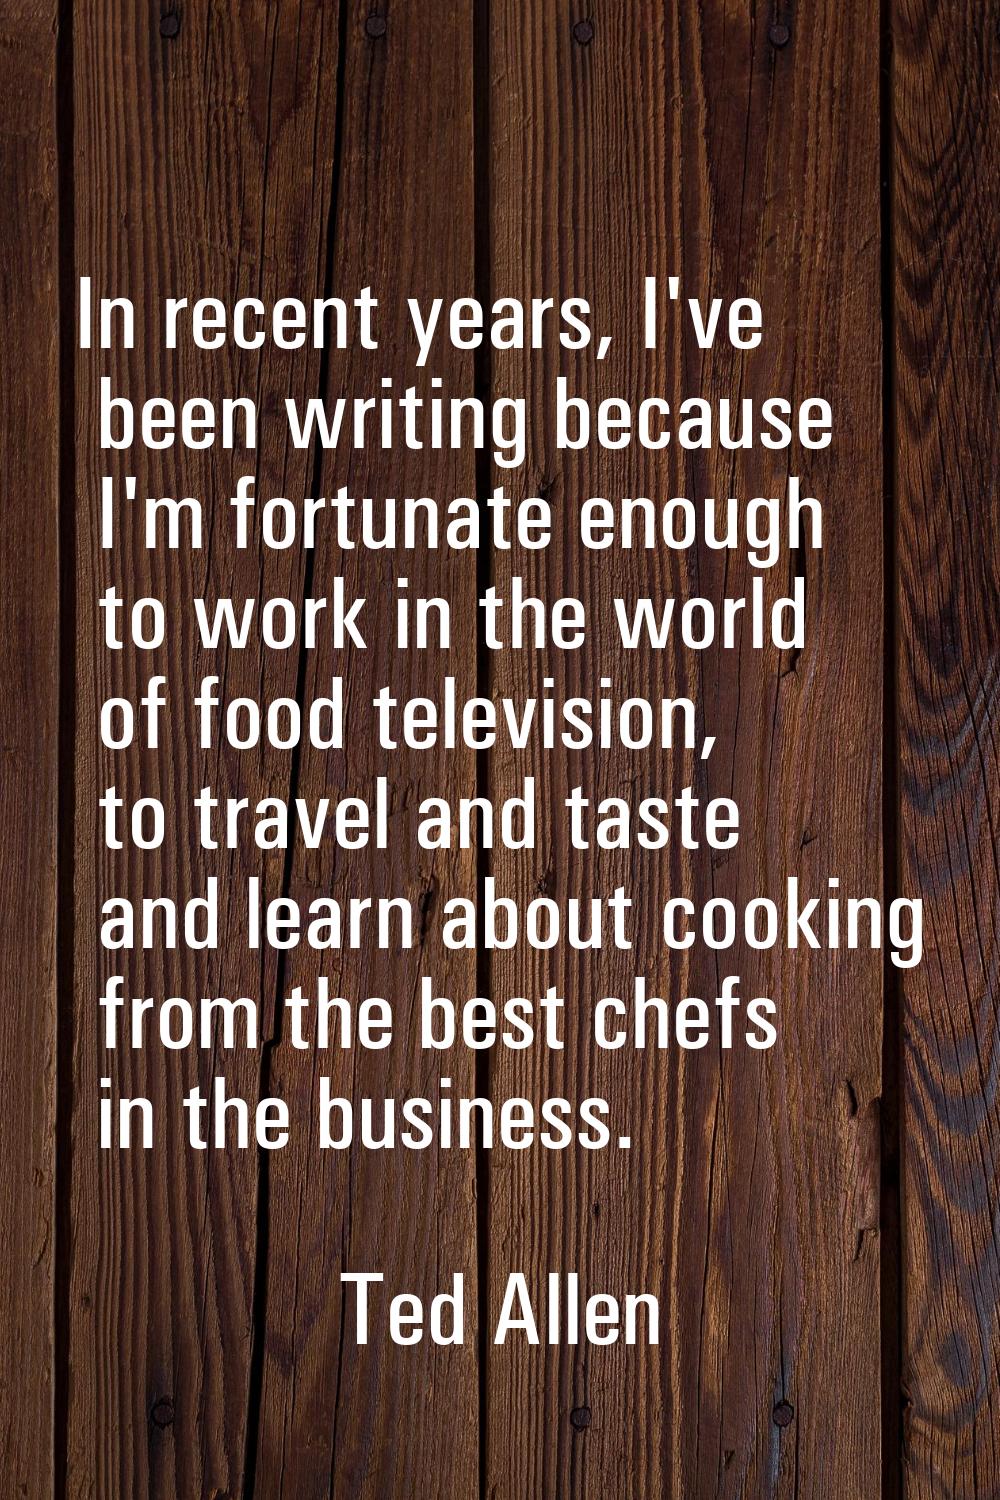 In recent years, I've been writing because I'm fortunate enough to work in the world of food televi